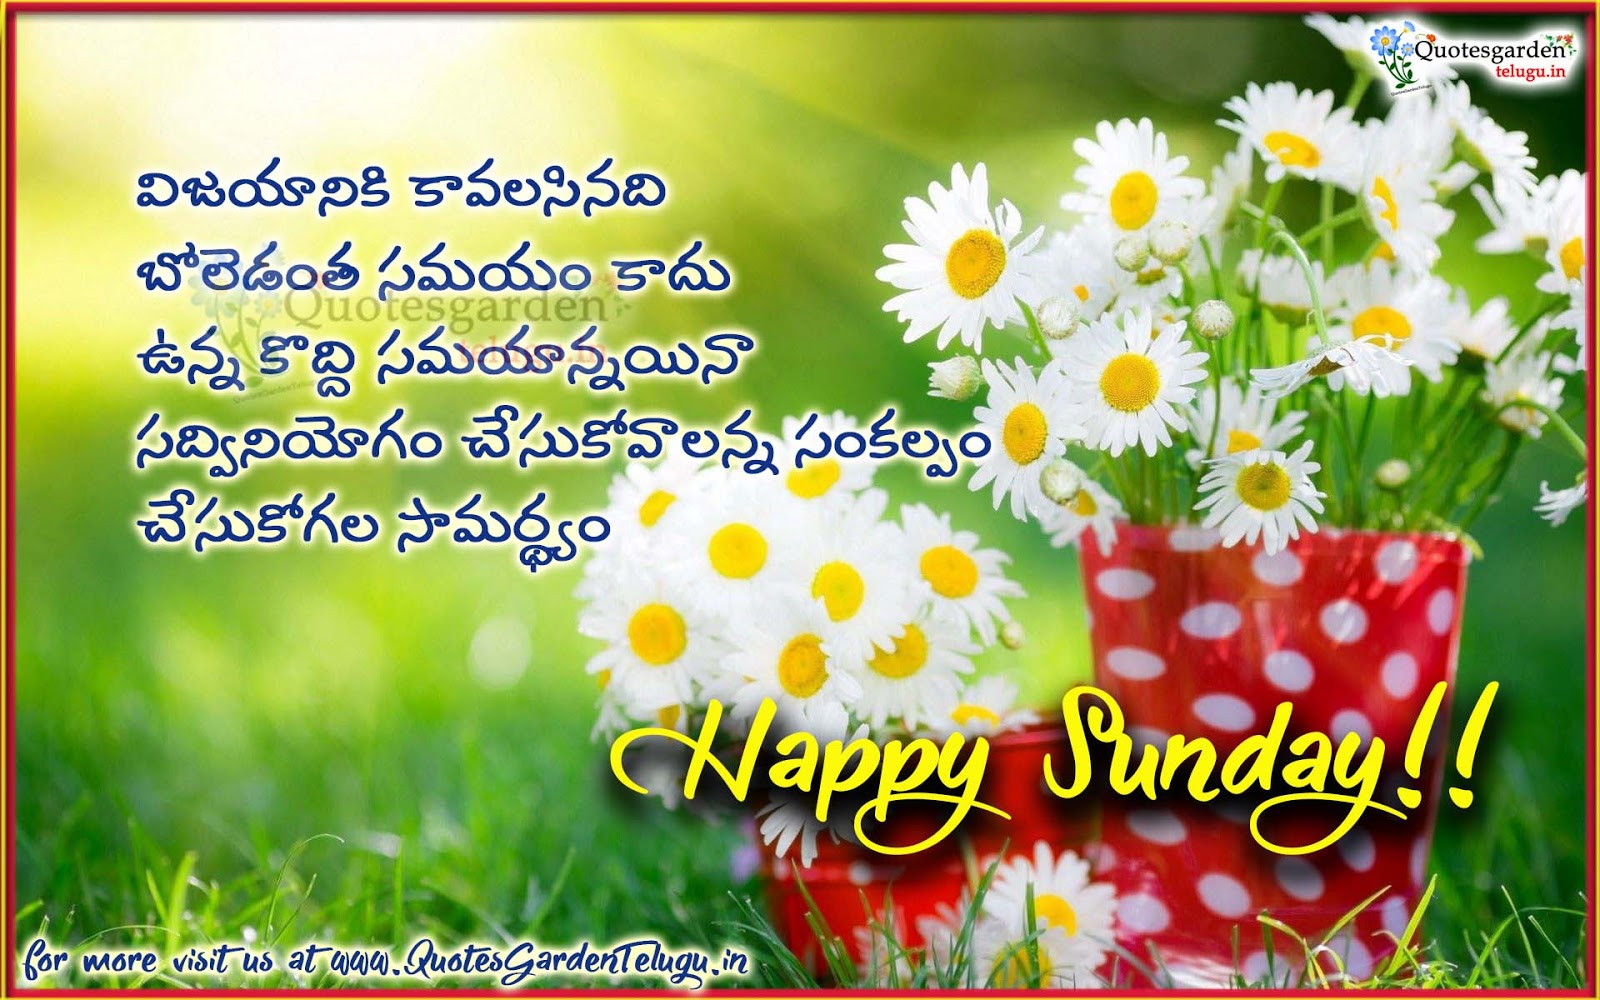 Best Telugu Sunday messages quotes sms - Happy Sunday Quotes ...